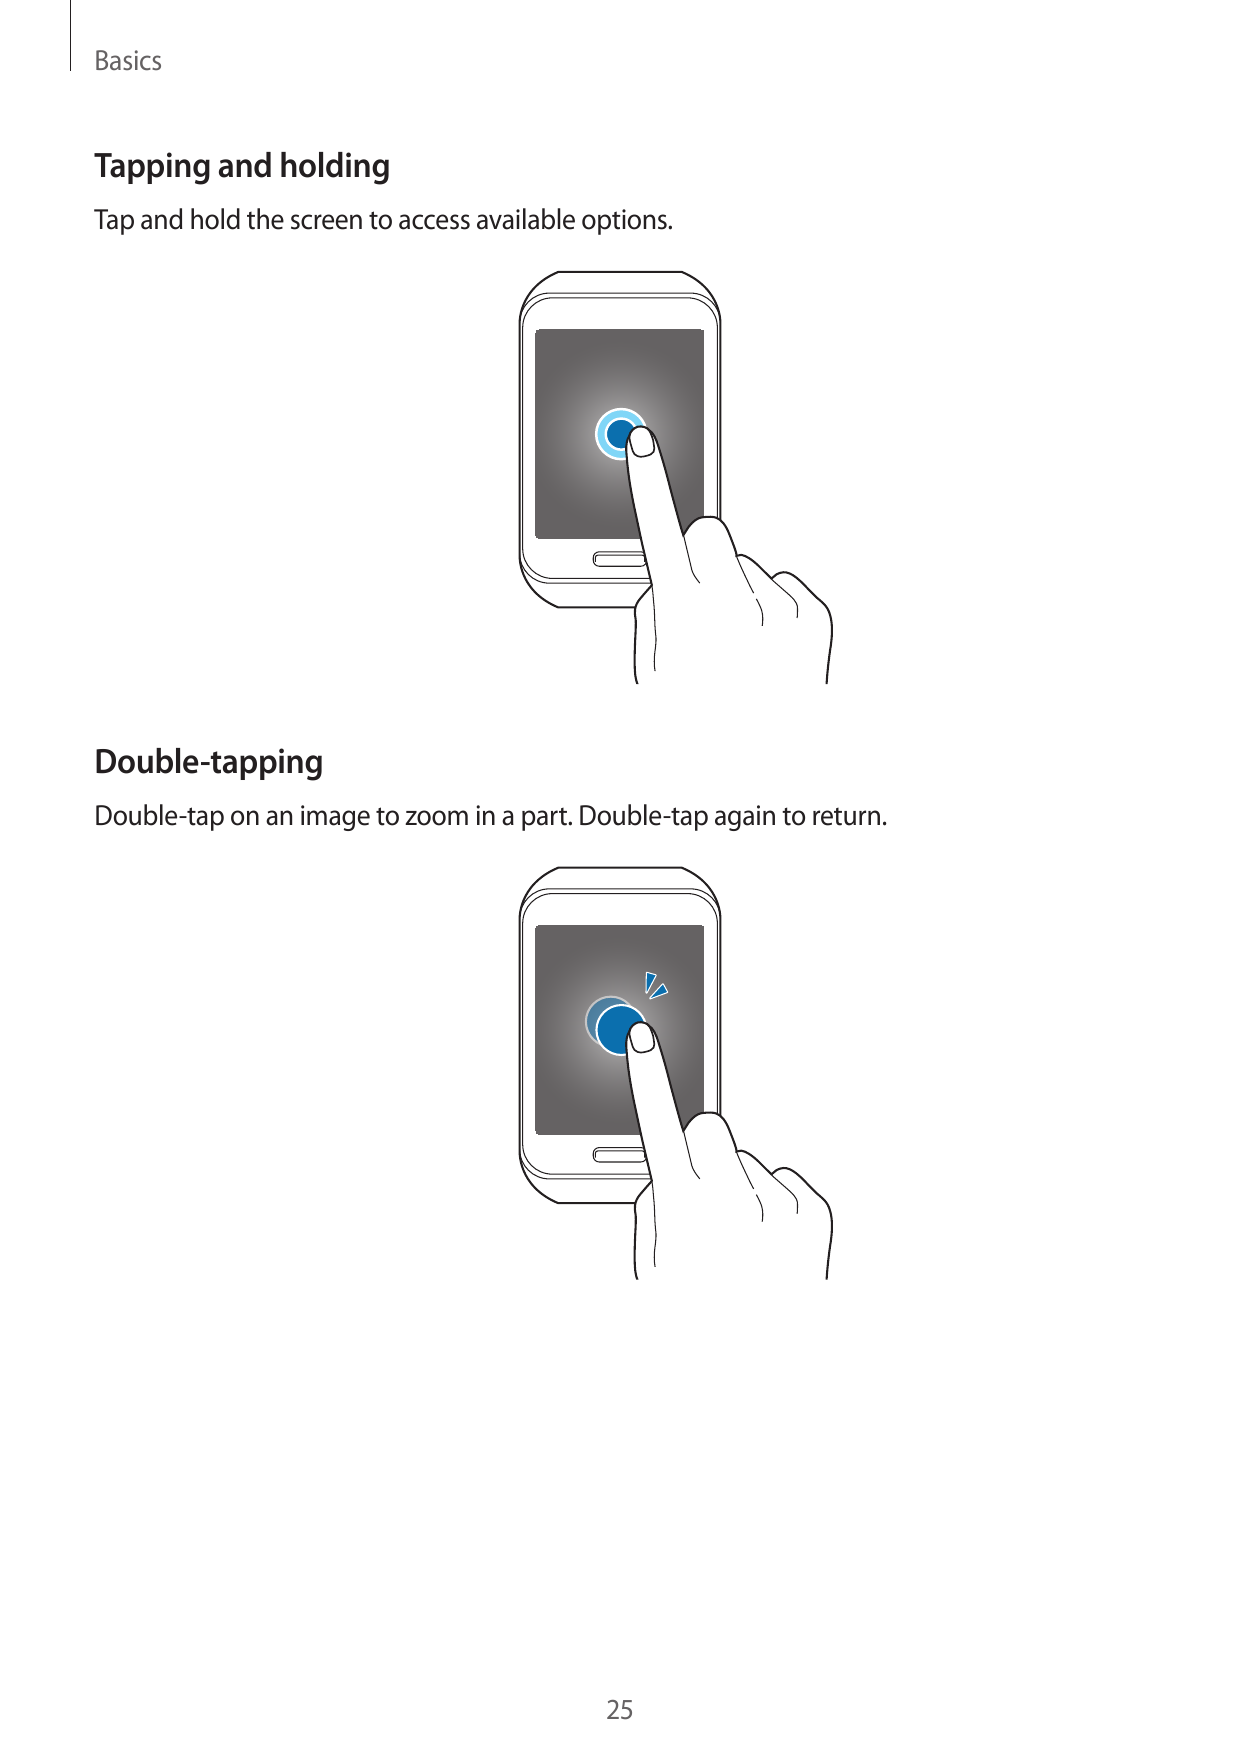 BasicsTapping and holdingTap and hold the screen to access available options.Double-tappingDouble-tap on an image to zoom in a p